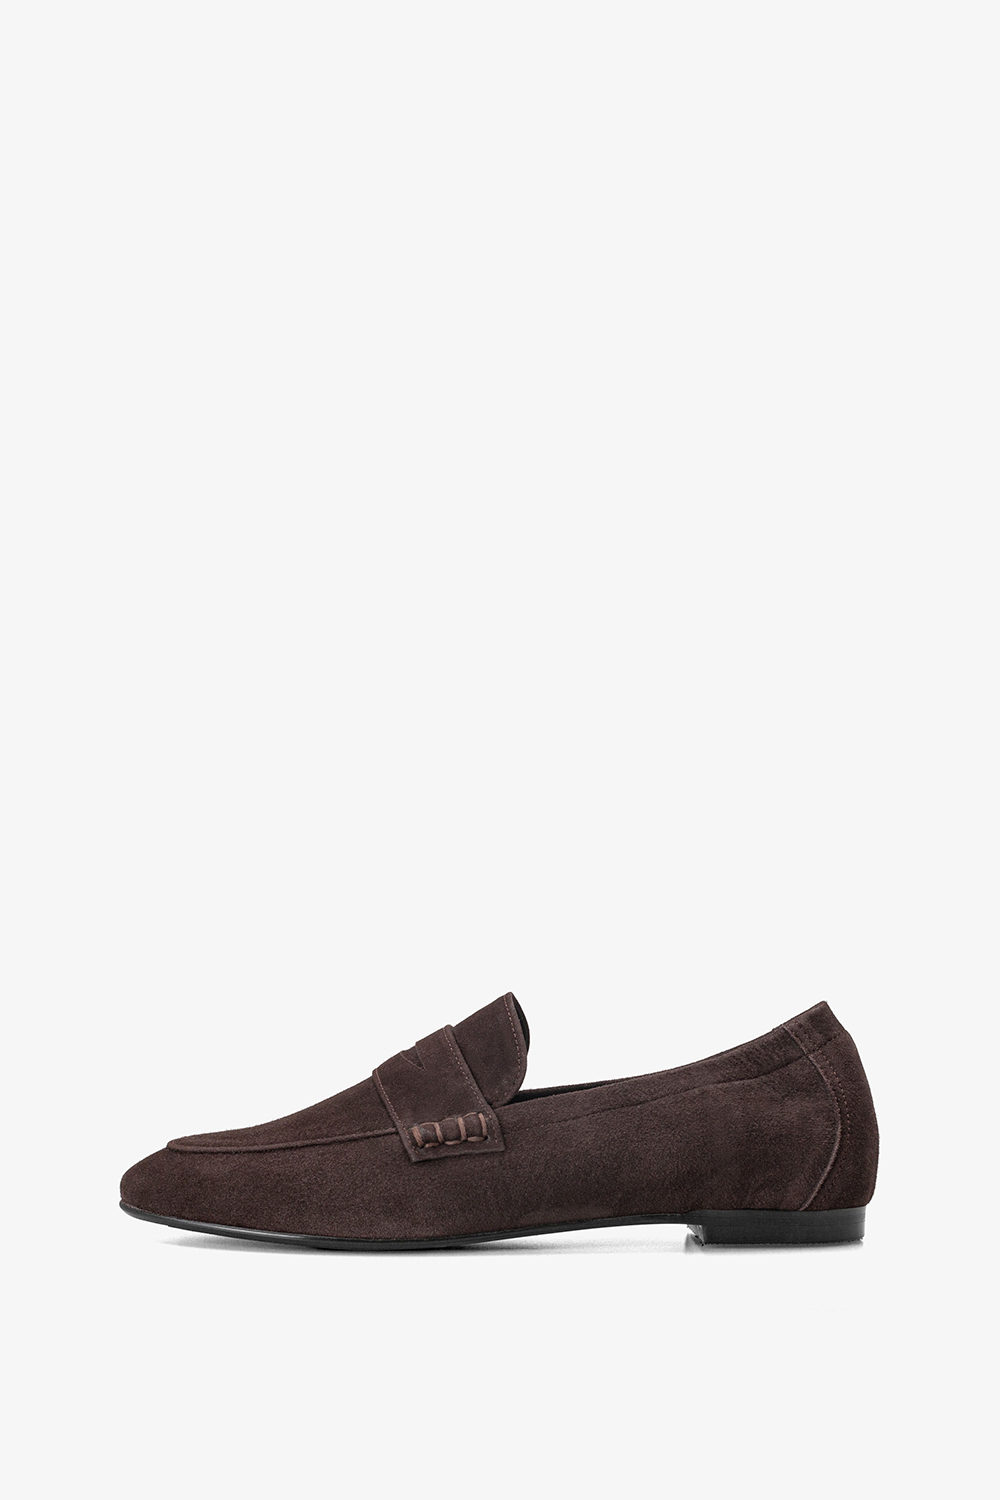 Modern Penny Loafer in Chocolate Brown